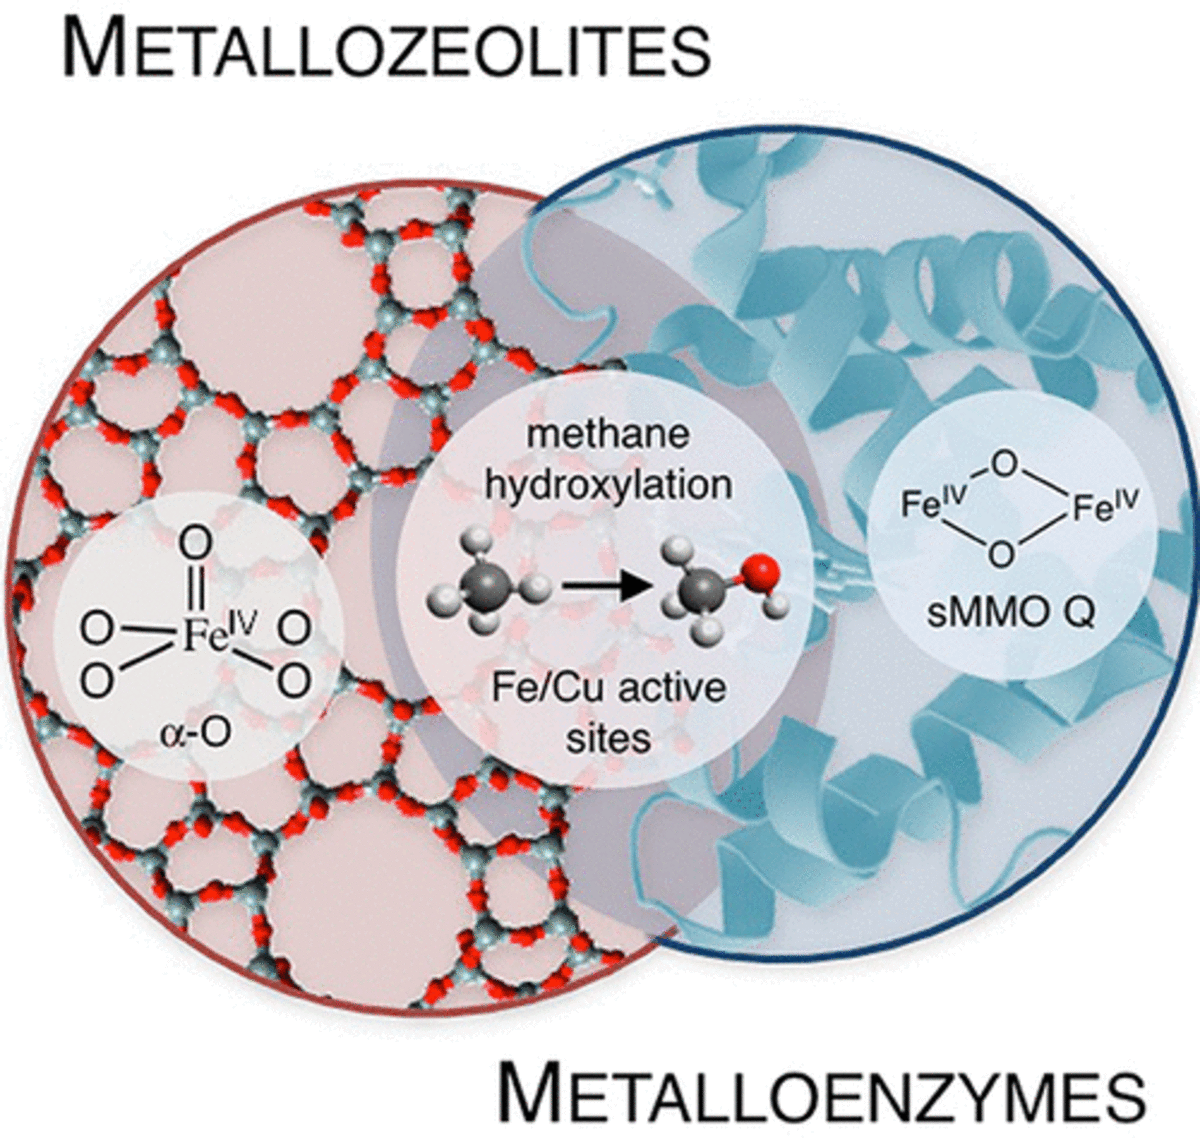 Iron and Copper Active Sites in Zeolites and Their Correlation to Metalloenzymes